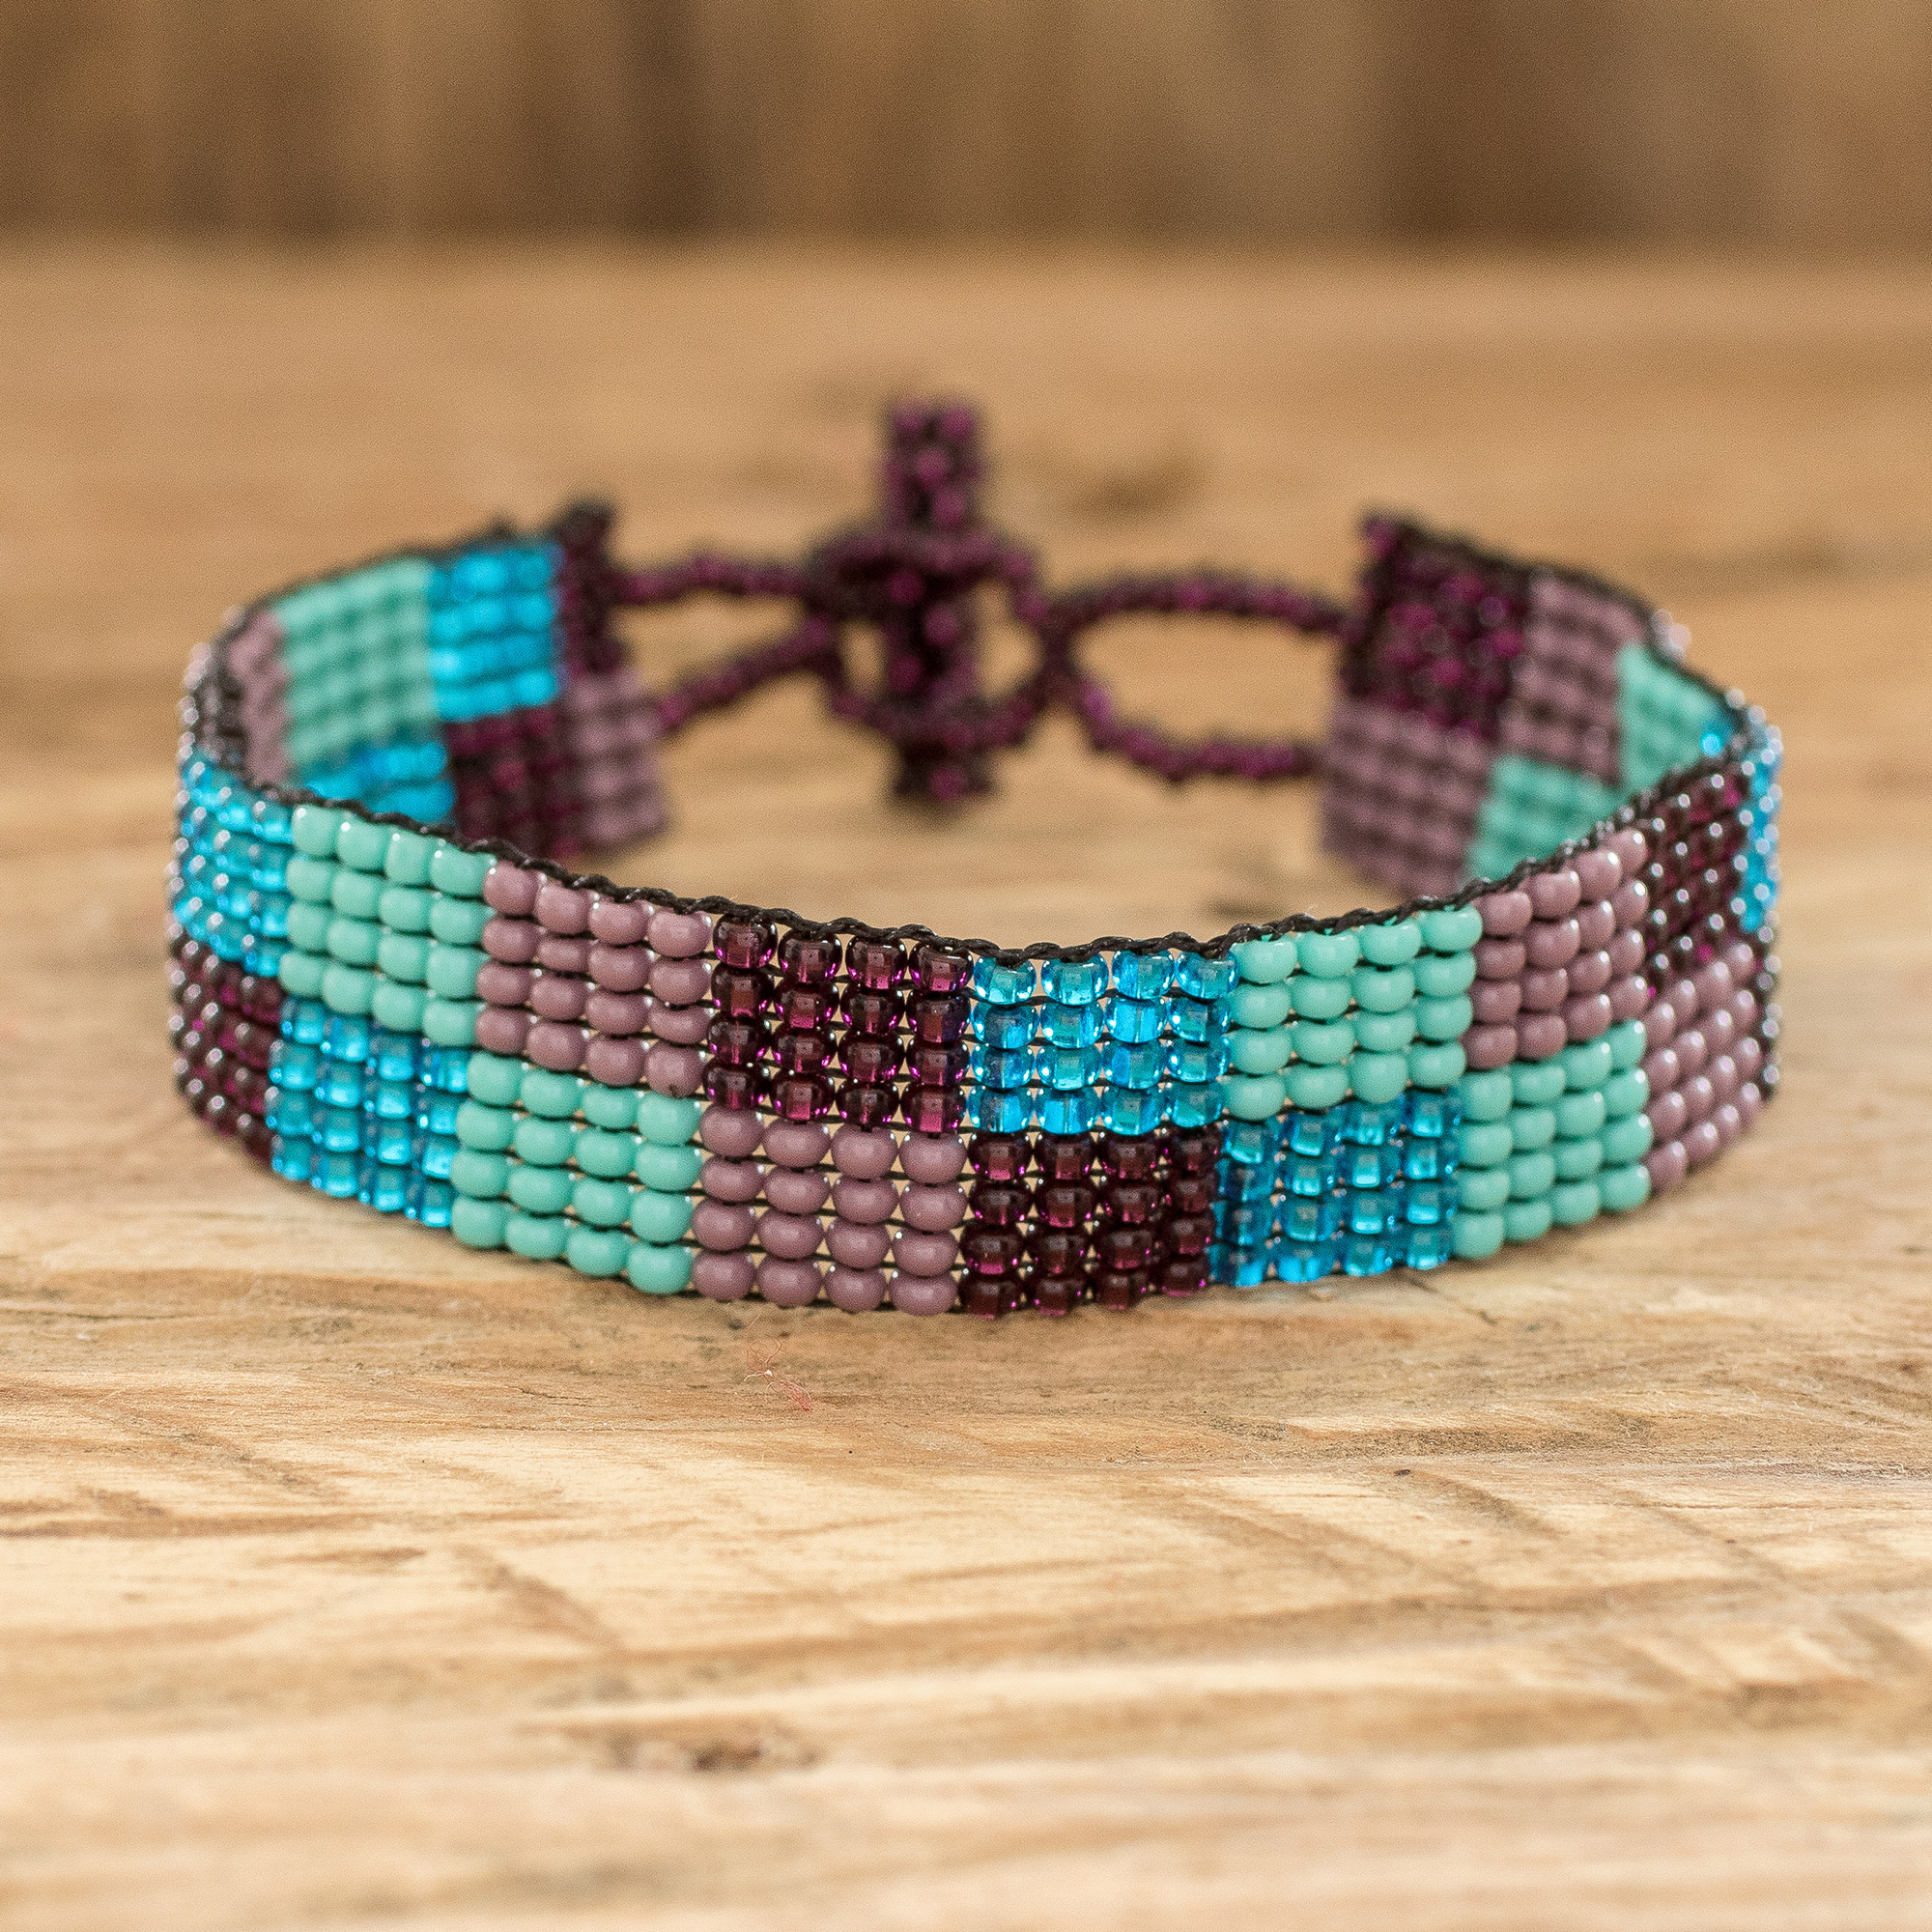 Handcrafted Geometric Beaded Wristband Bracelet - Colorful